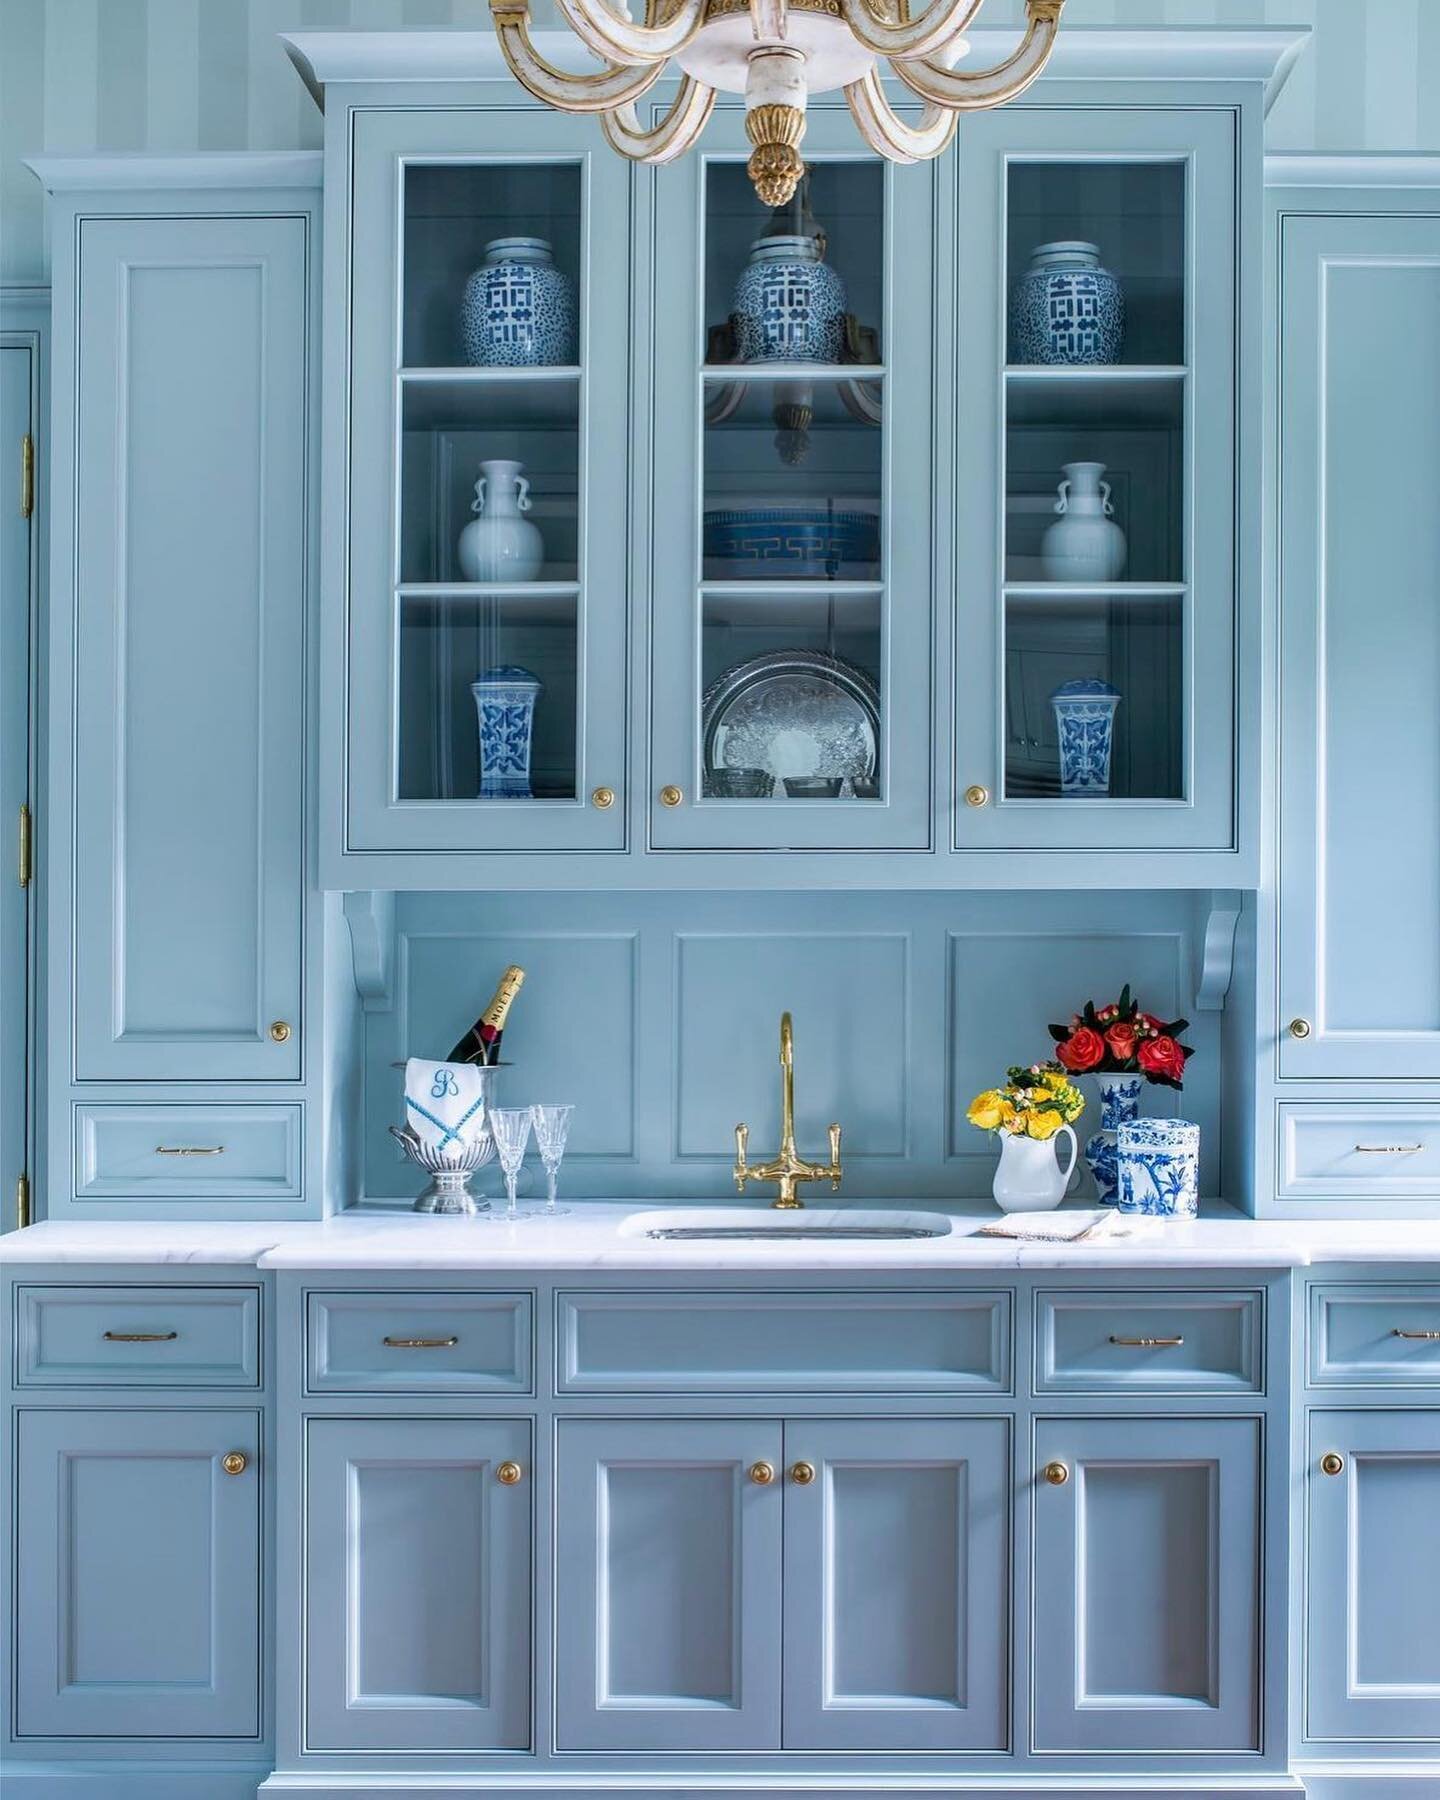 Fresh morning light. Layers of blue on blue. No signs of teenage breakfast detriment. What&rsquo;s not to like?
📸 @mallorymathisoninc #blueonblue #kitchendesign